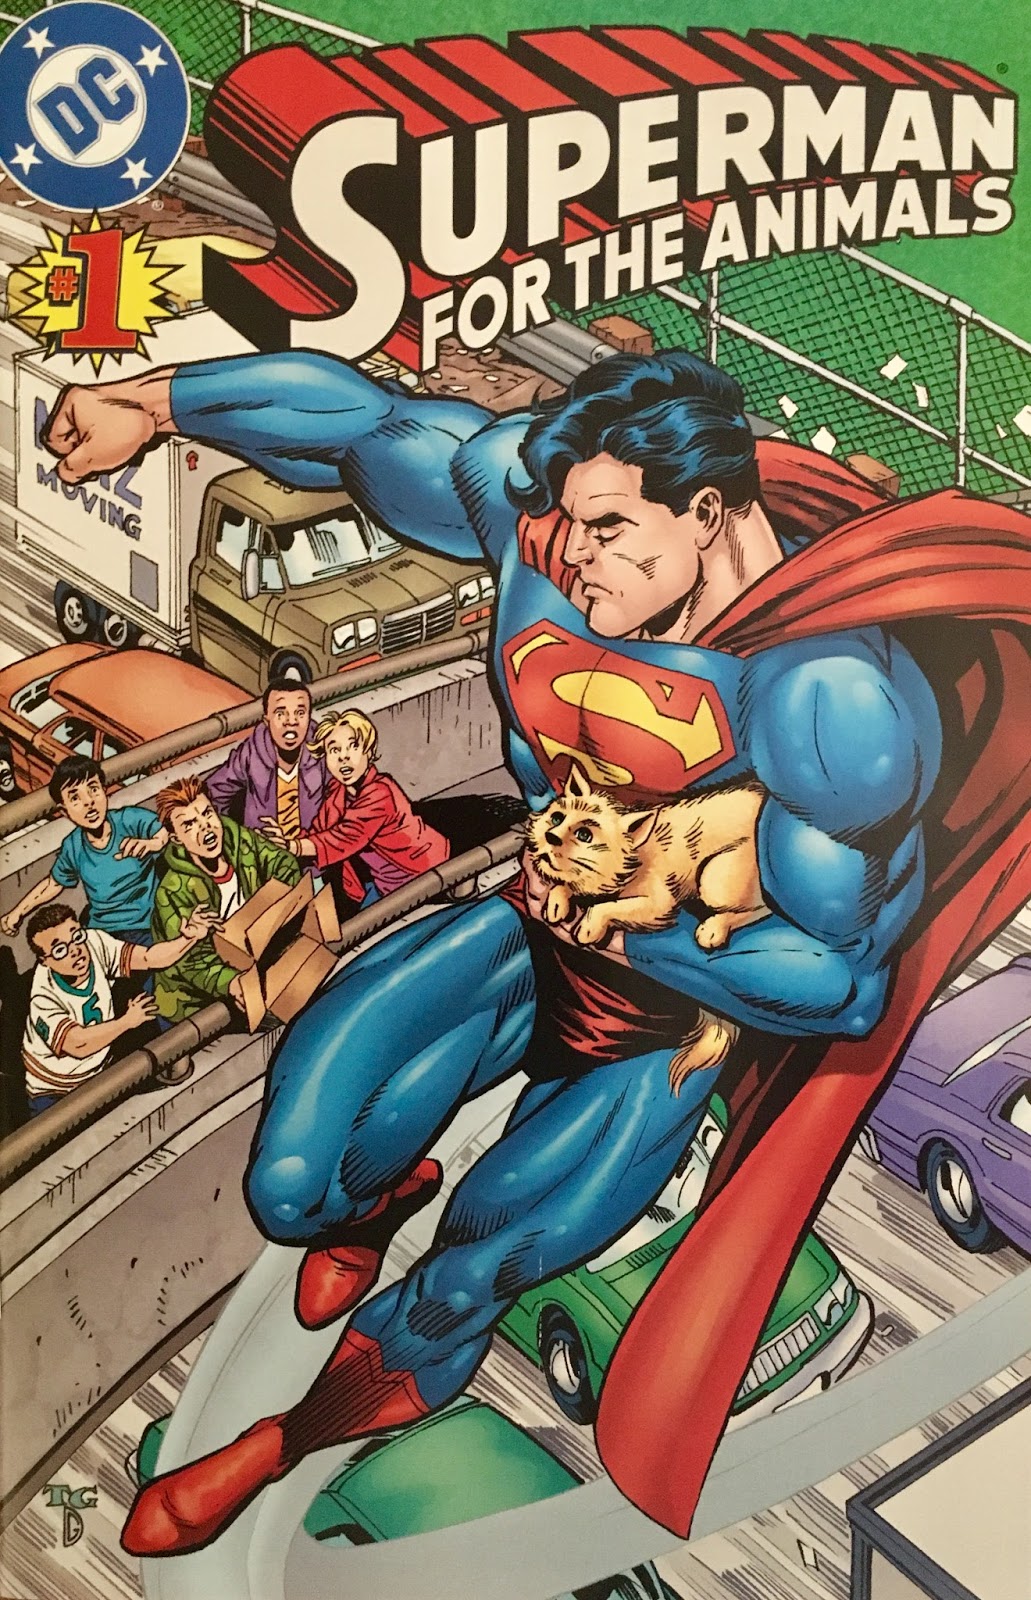 Superman for the Animals #1 (2000) | Chris is on Infinite Earths